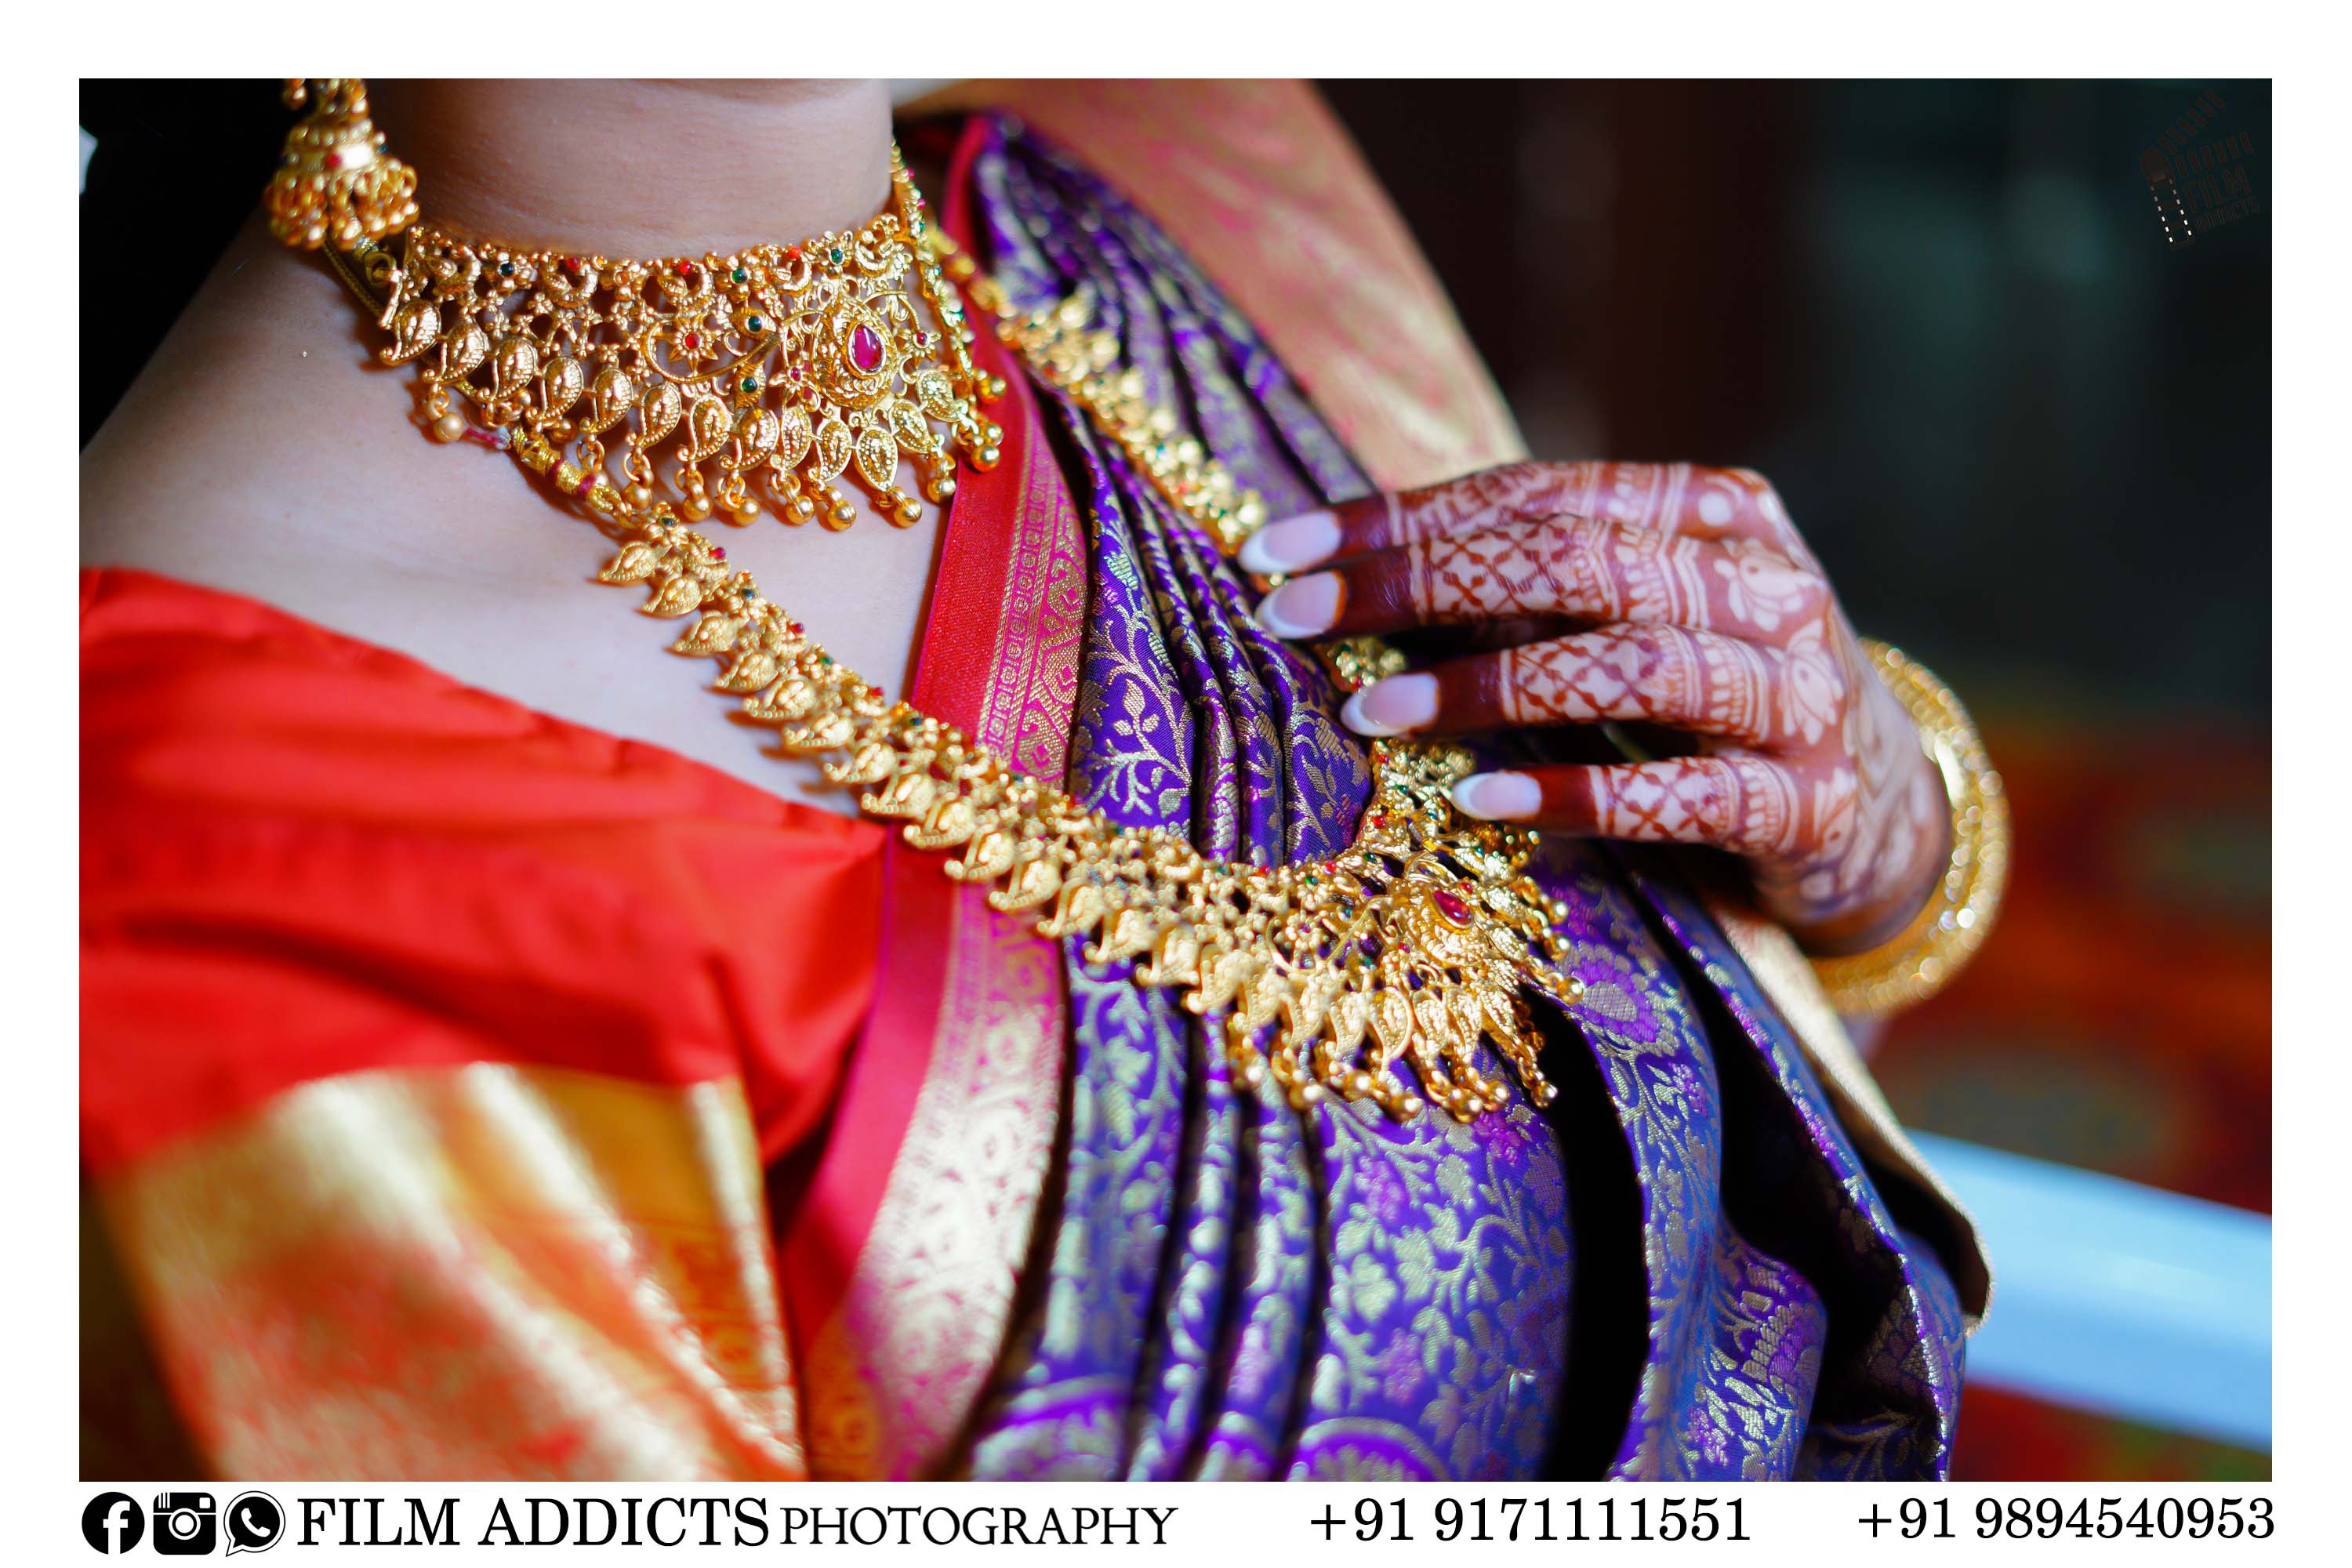 Best Wedding Planners in Salem-FilmAddicts Photography,best candid photographers in Madurai ,Best Wedding Candid photographers in Madurai, Wedding Candid Moments, FilmAddicts Photography ,FilmAddictsPhotography ,best wedding in Madurai, Best Candid shoot in Madurai, Best moment ,Best wedding moments, Best wedding photography in Madurai, Best wedding videography in Madurai, Bestcoupleshoot, Best candid, Best wedding shoot, Best wedding candid, best marriage photographers in Madurai, best marriage photography in Madurai, best candid photography, best Madurai photography, Madurai ,Madurai photography ,Madurai couples ,candid shoot ,candid ,tamilnadu wedding photography, best photographers in Madurai, Best Wedding Photographers in Madurai,  Wedding Candid Moments FilmAddicts Photography, FilmAddicts Photographers,  Best Candid shooting Madurai, bestmoment , Best Wedding moments , Best wedding photography in Madurai, Best wedding videography in Madurai, Best couple shoot, Best candid, Best wedding shoot ,Best wedding candid, best marriage photographers in Madurai, best marriage photography in Madurai, best candid photography, best Madurai photography ,Madurai photography , Madurai couples, candid shoot, candid, tamilnadu wedding photography, best photographers in Madurai, Tamilnadu